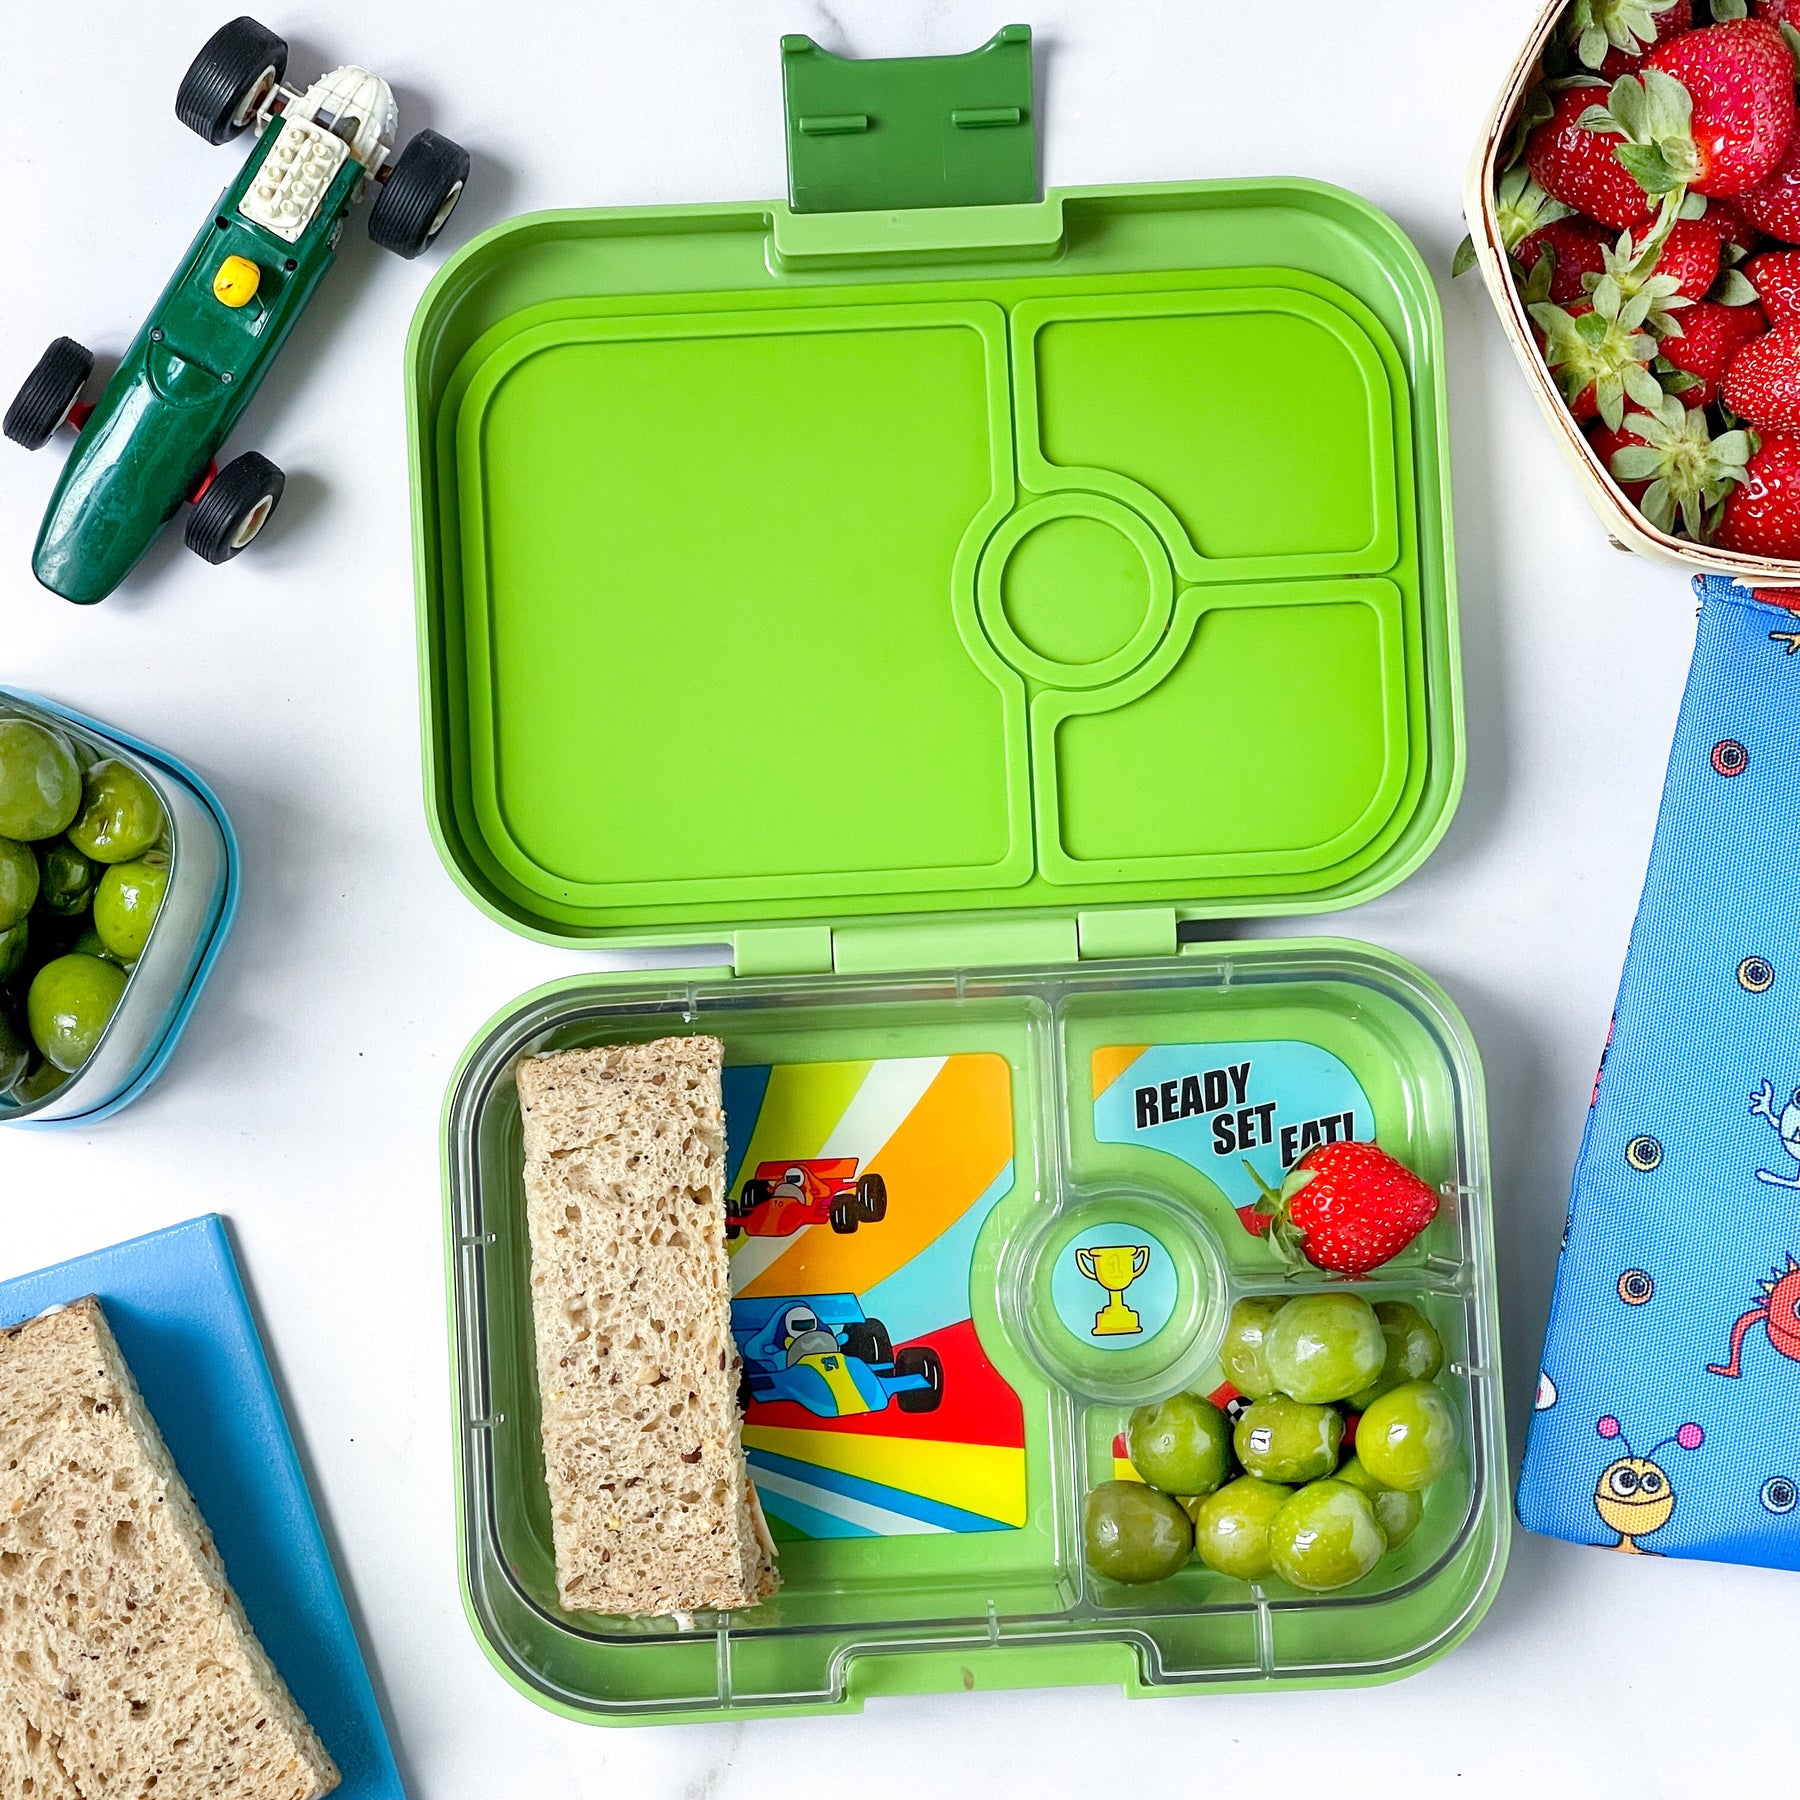 on-The-Go Kids Bento Lunch Box Eco-Friendly Durable Leakproof